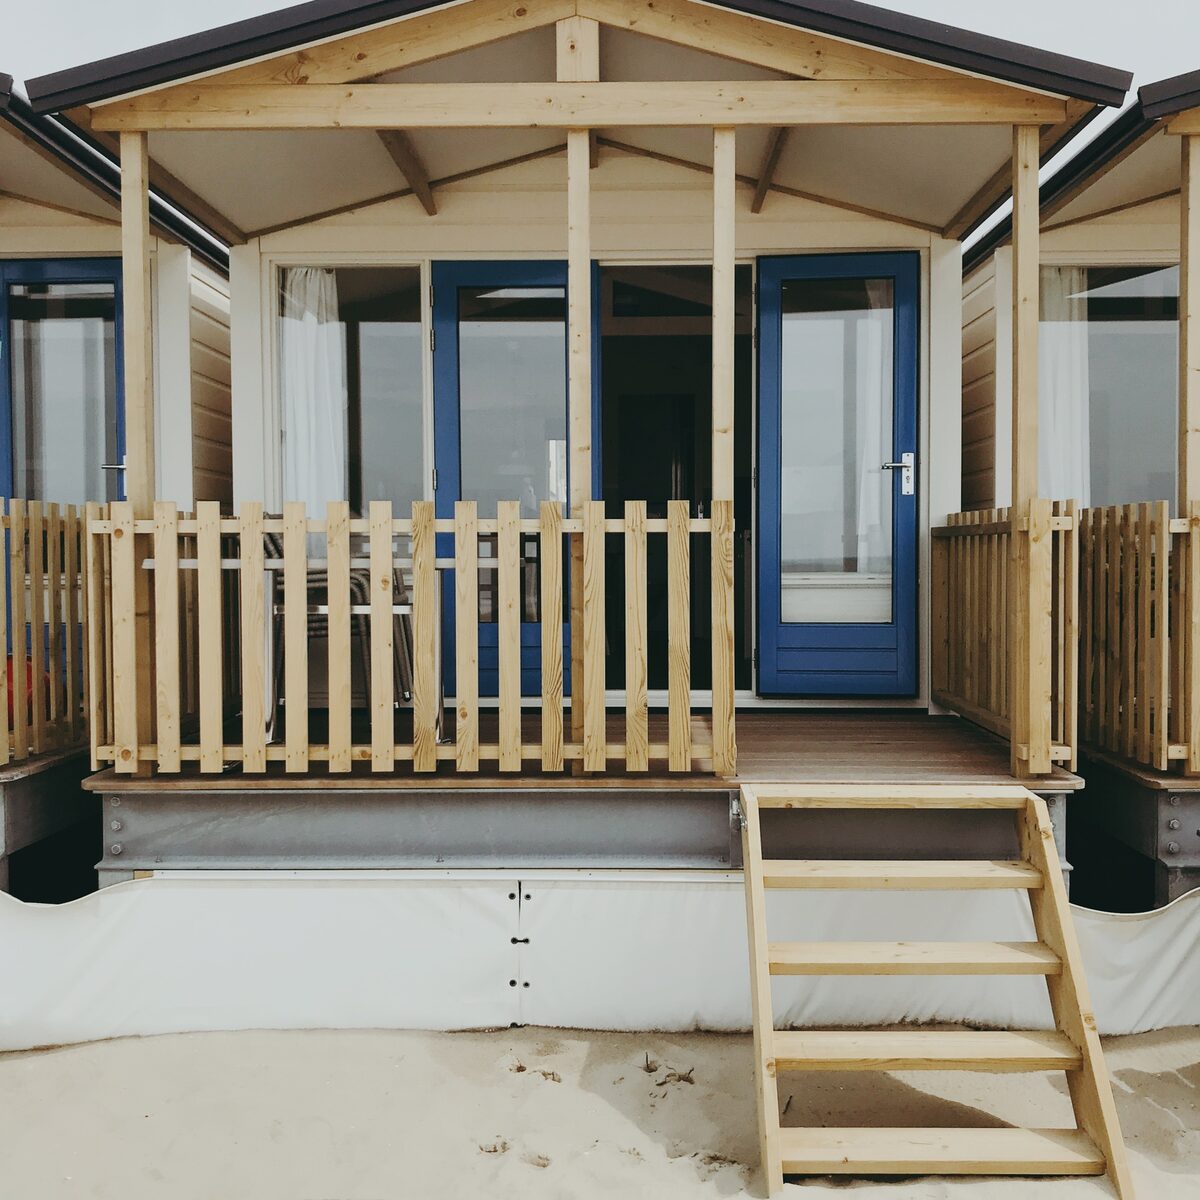 Beach house seaside 4p (with double bed)